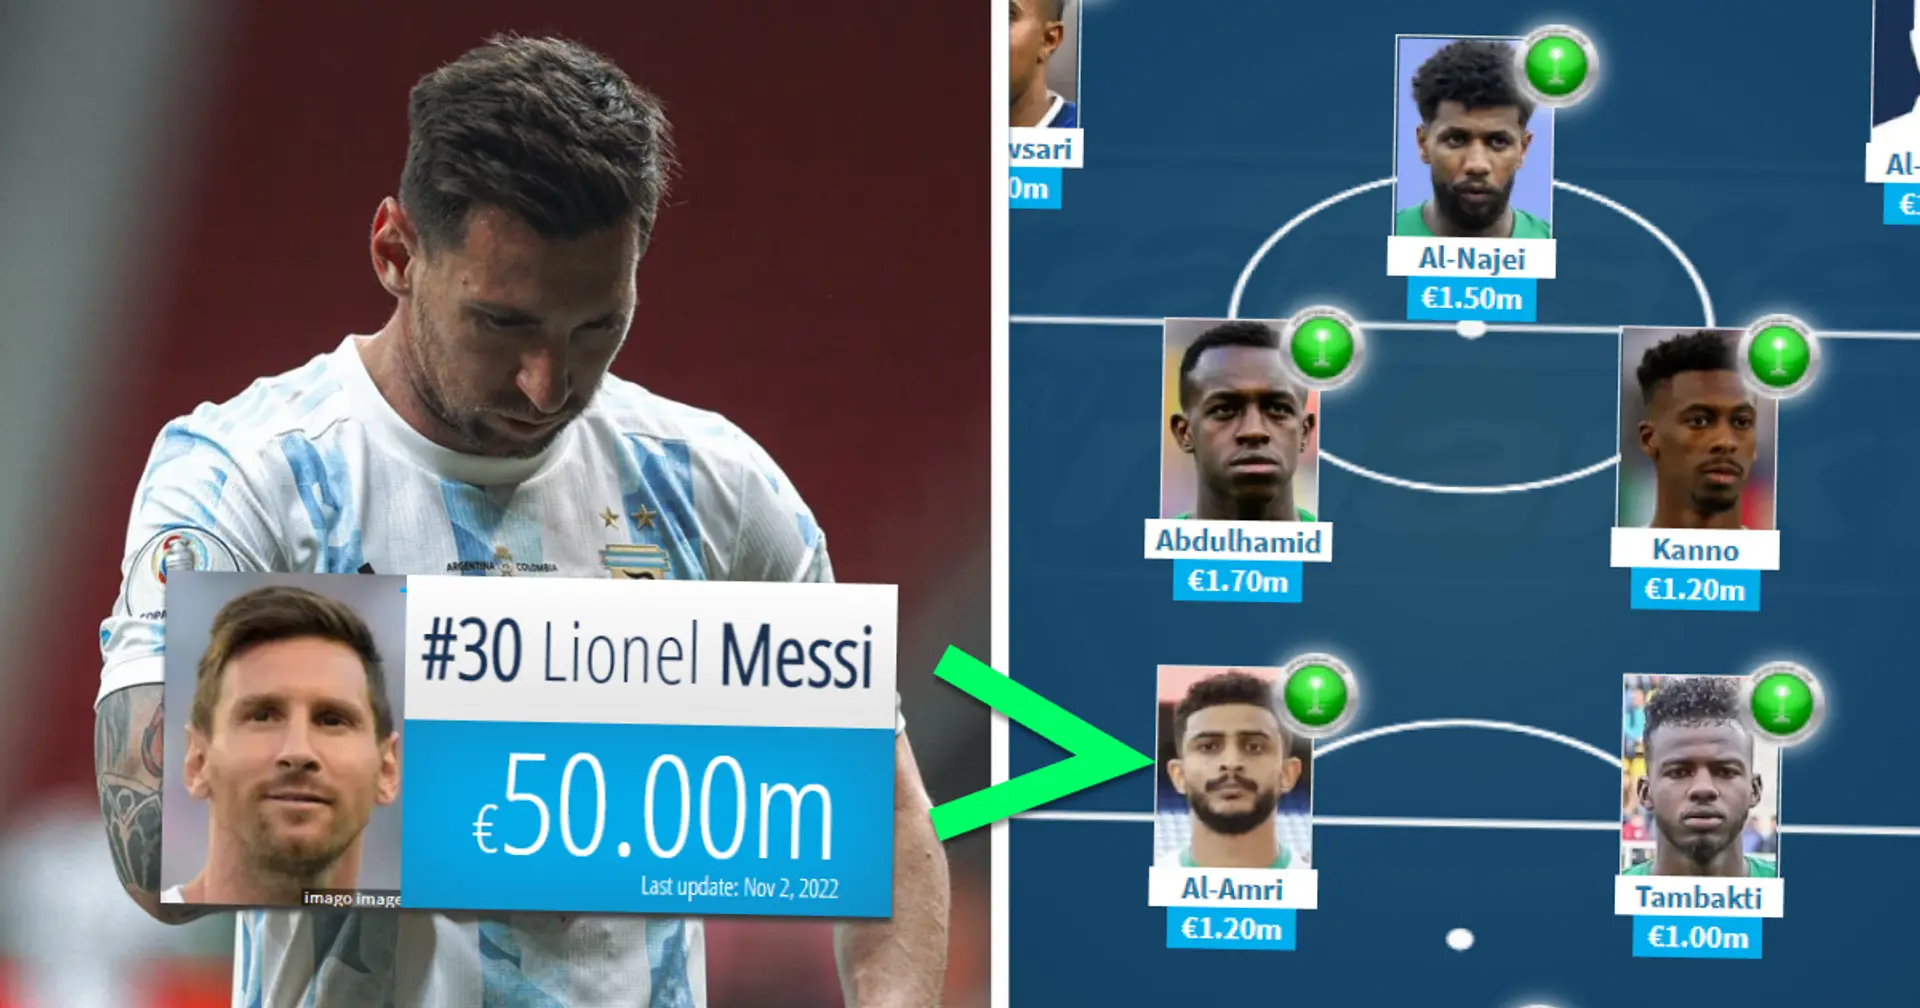 Total market value of Saudi Arabia team calculated - as much as Argentina's goalkeeper alone